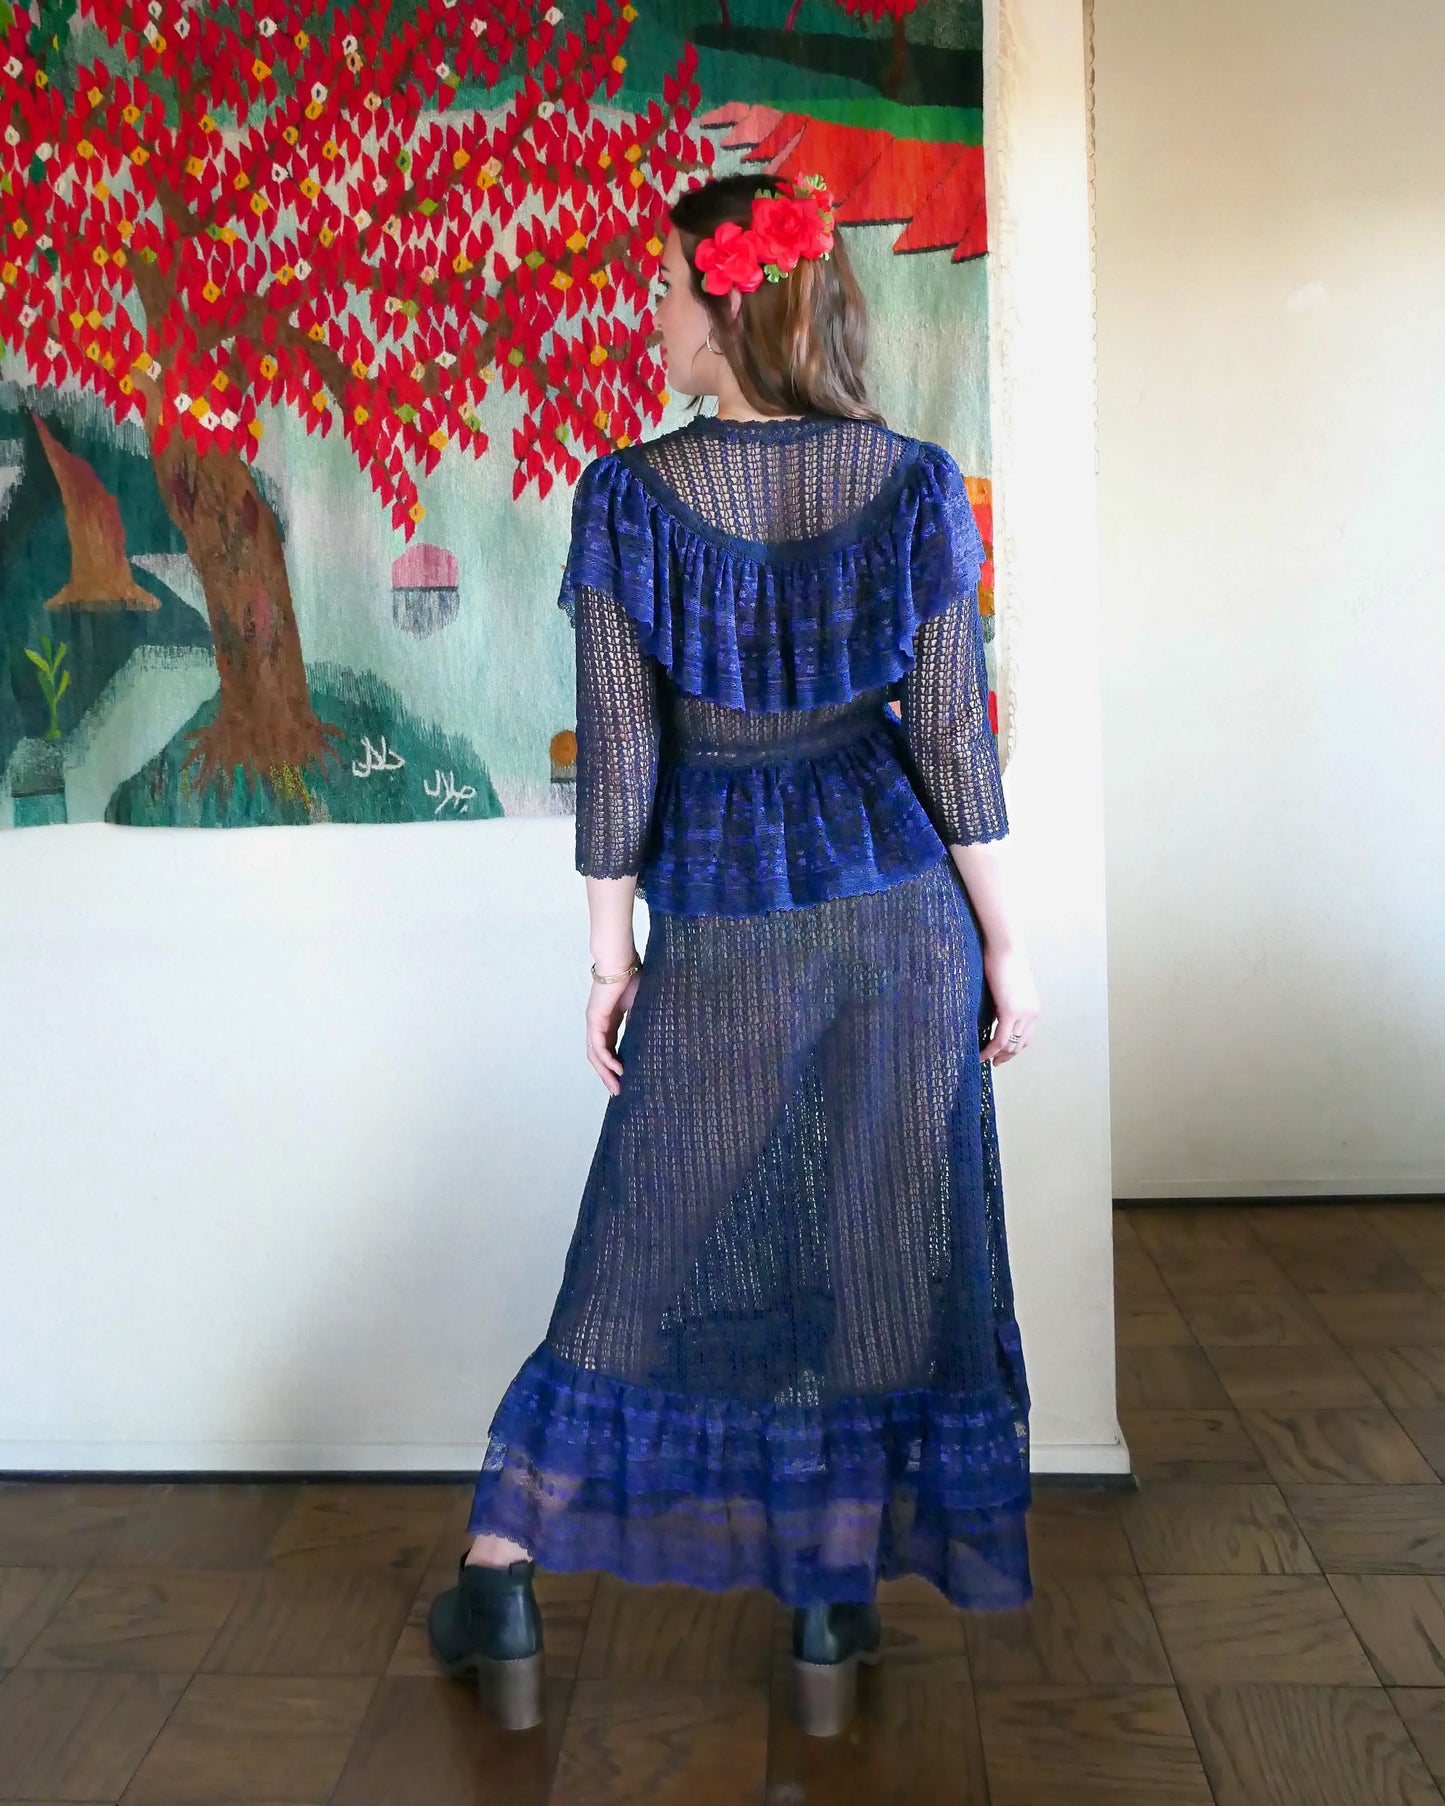 The Indigo Crochet and Lace Victorian Dress